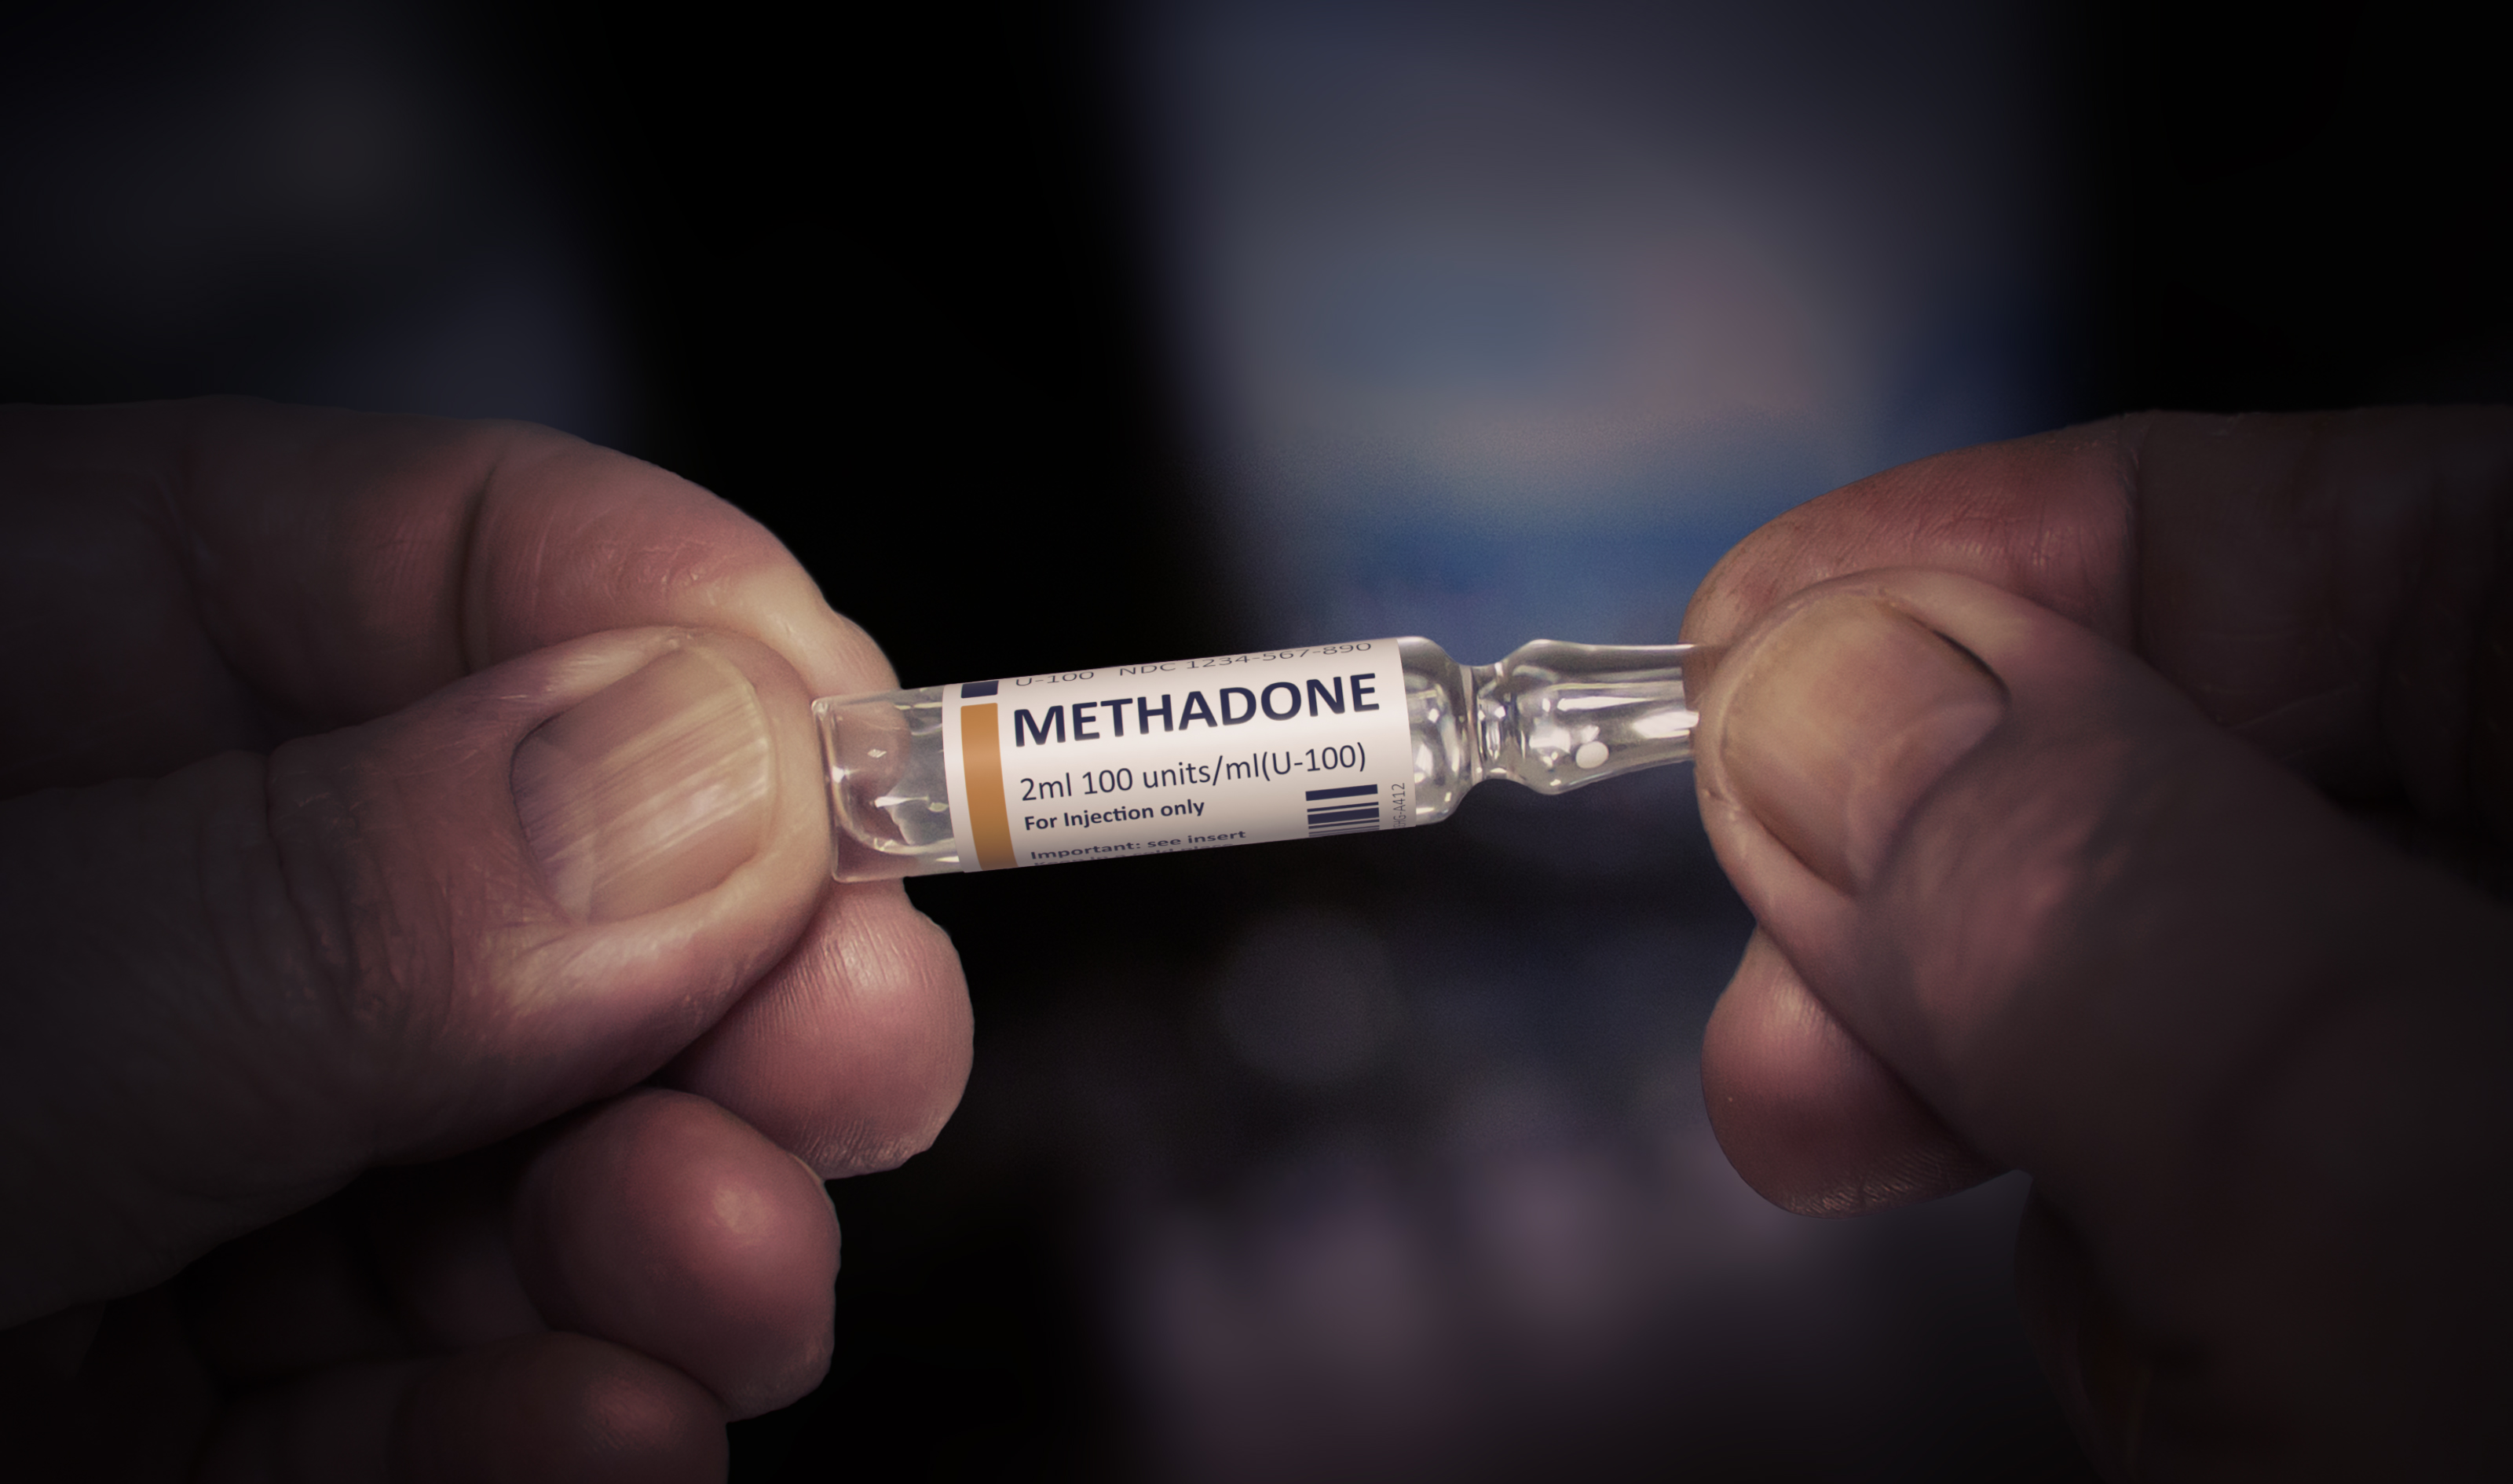 SAMHSA reduces barriers to new methadone patients in jail through